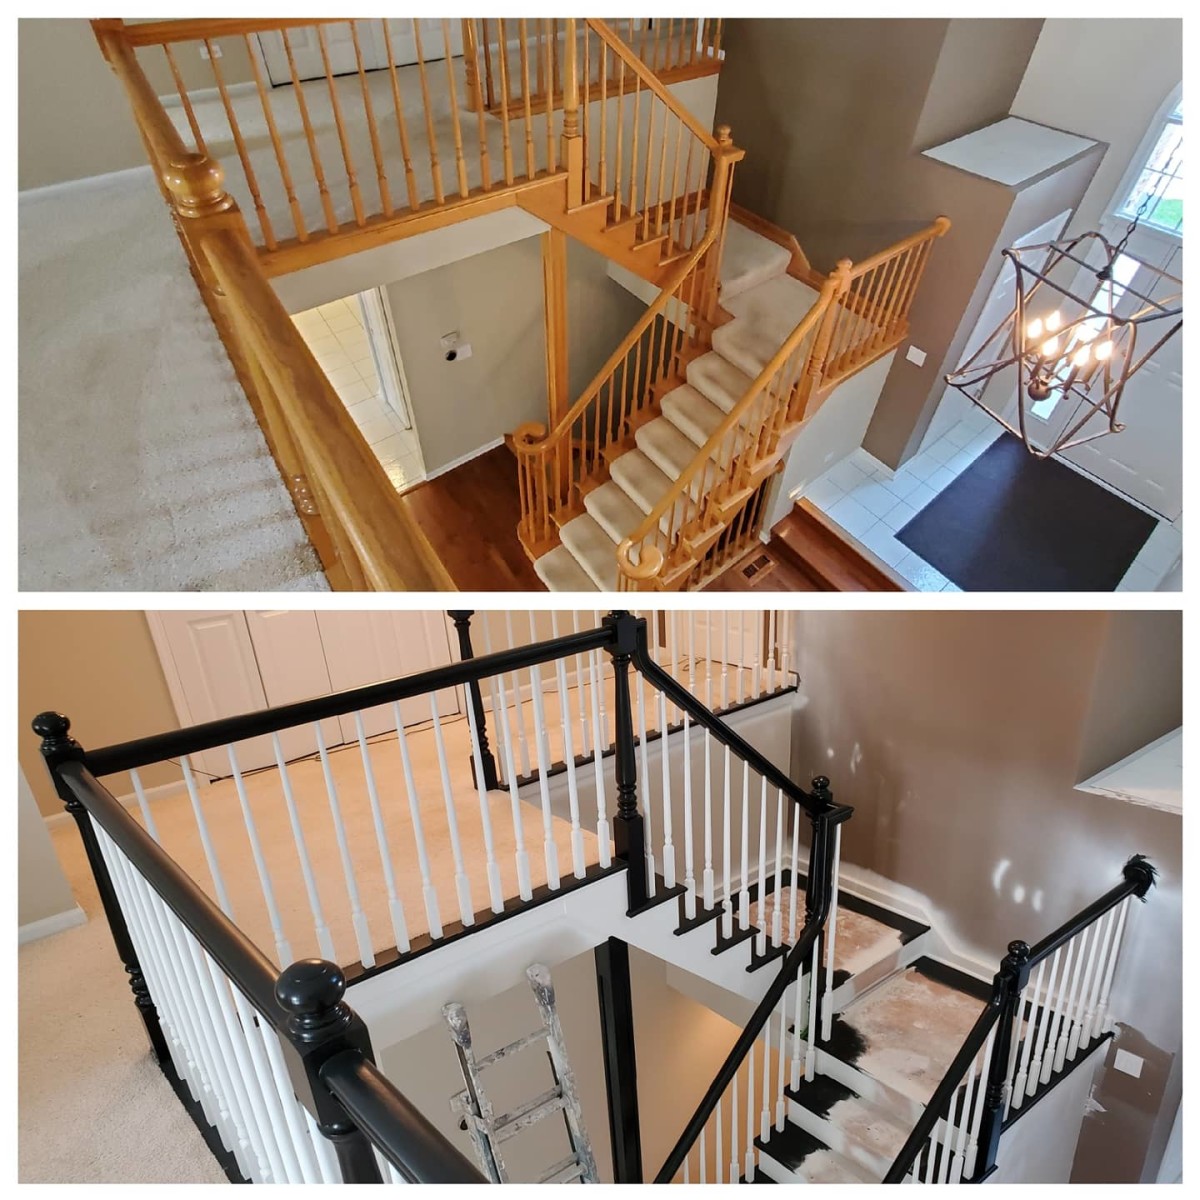 Staircase spindles I spray painted with my new Graco sprayer.